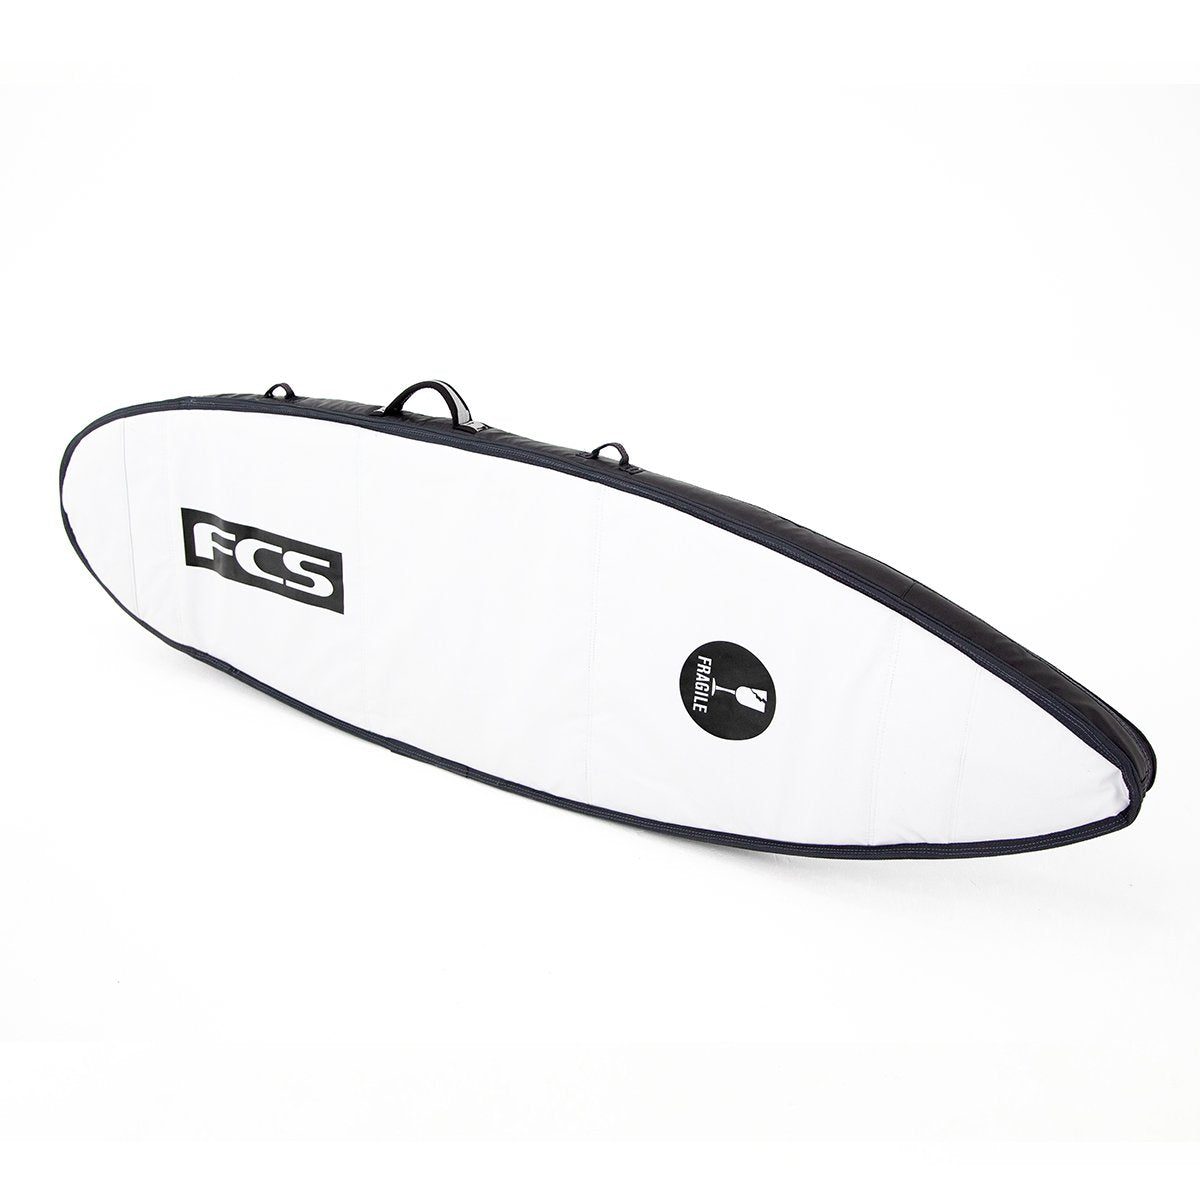 FCS TRAVEL 1 FUNBOARD COVER